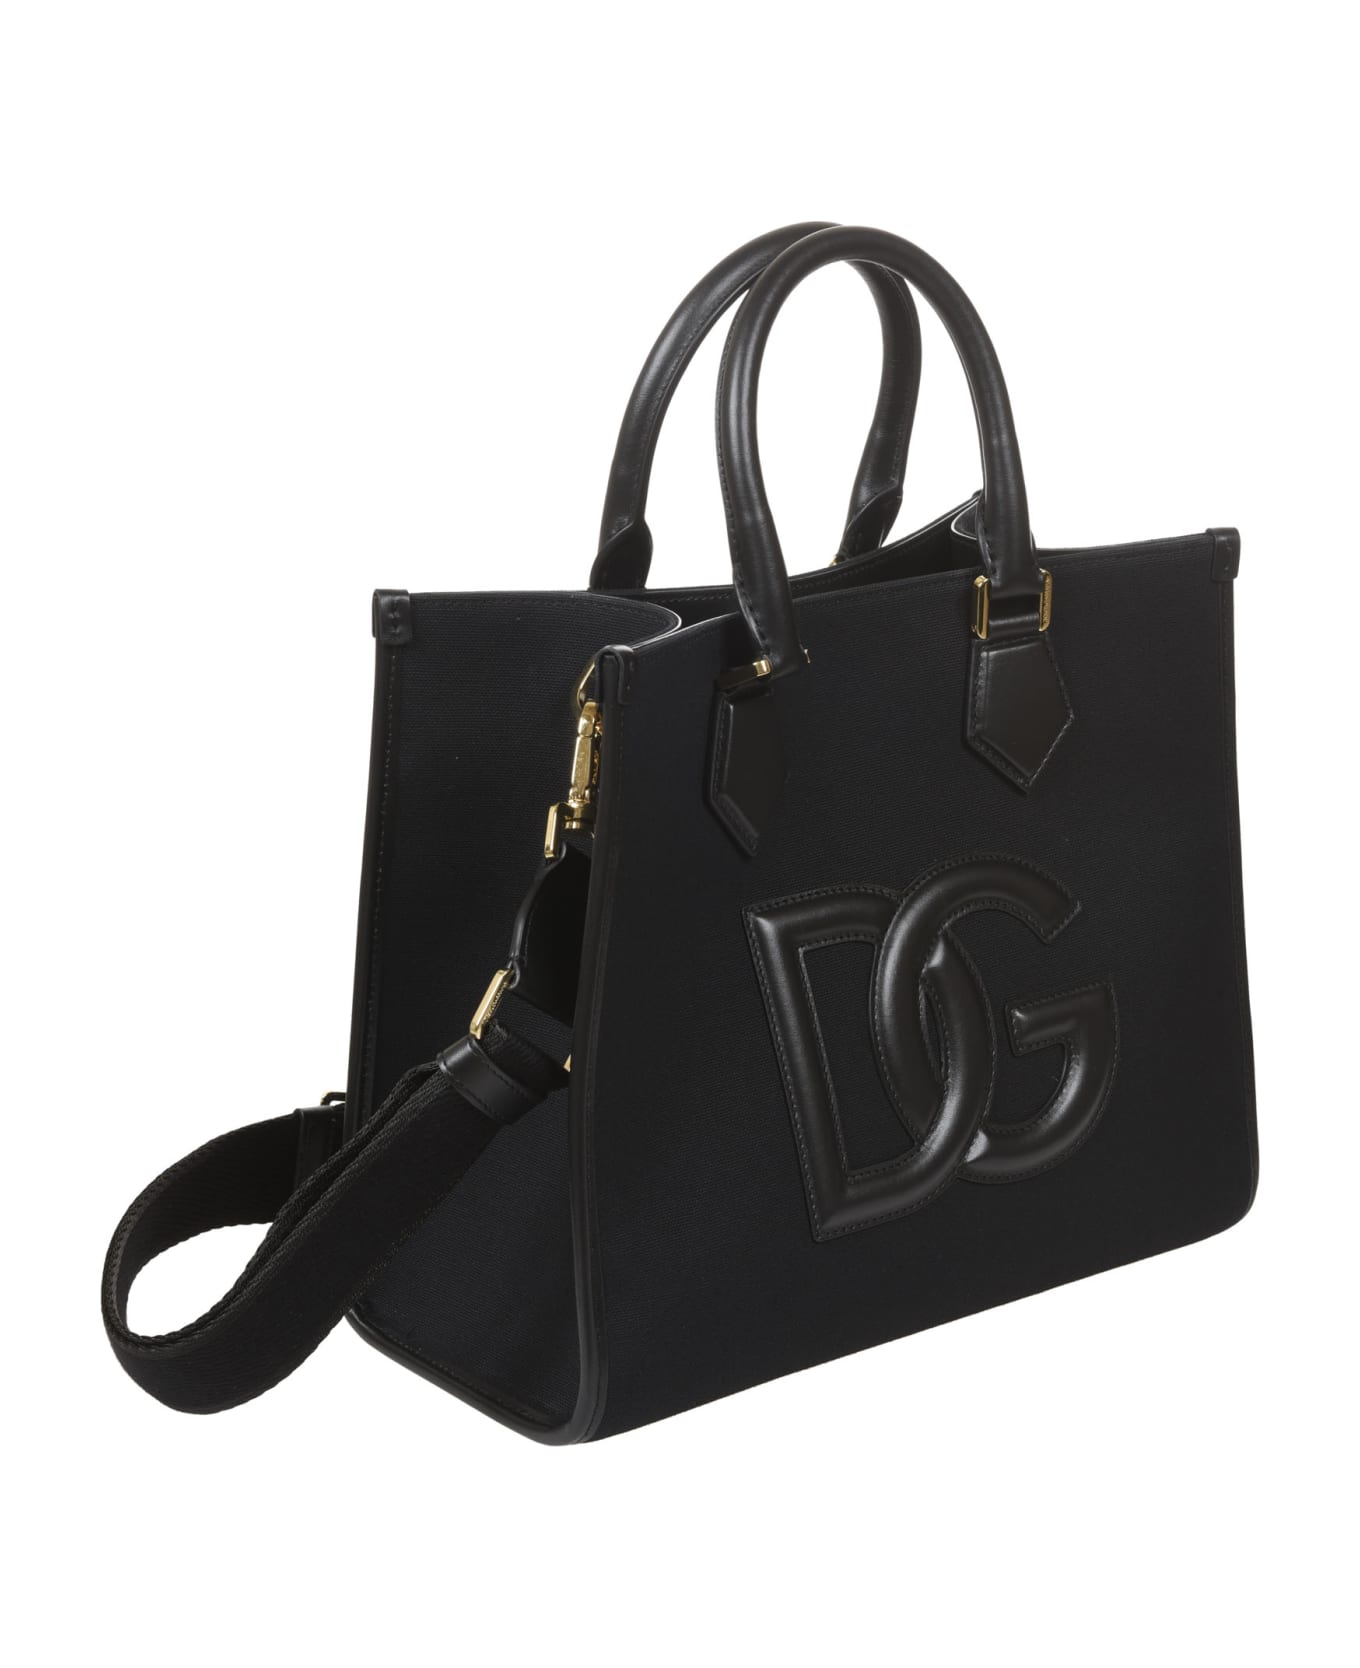 Dolce & Gabbana Logo Patched Top Handle Tote - Black